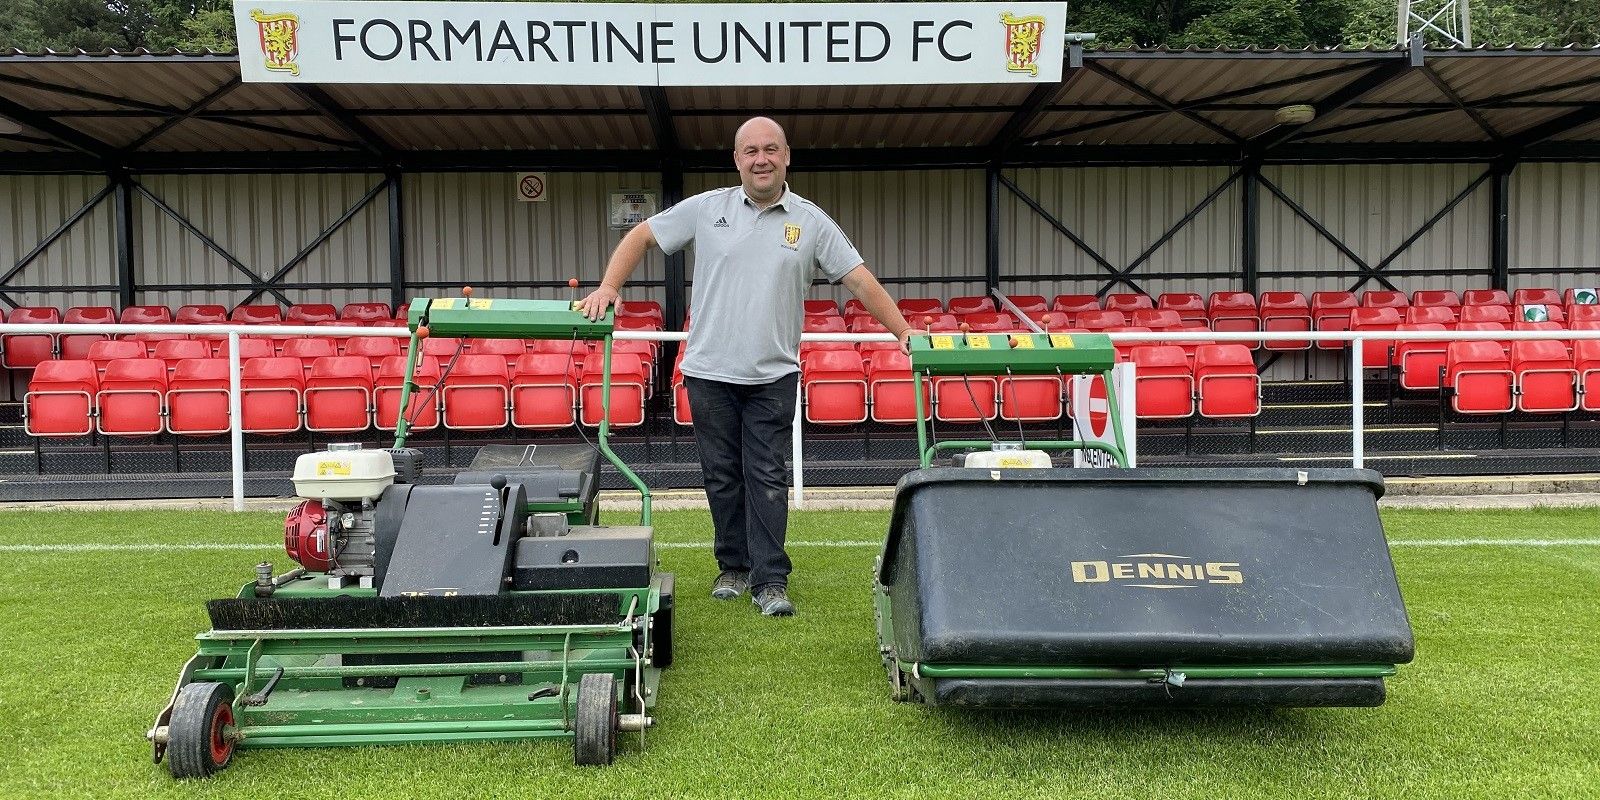 Video - Formartine-United-FC-Groundsman-Chooses-Dennis-G860-and-PRO-34R-mowers